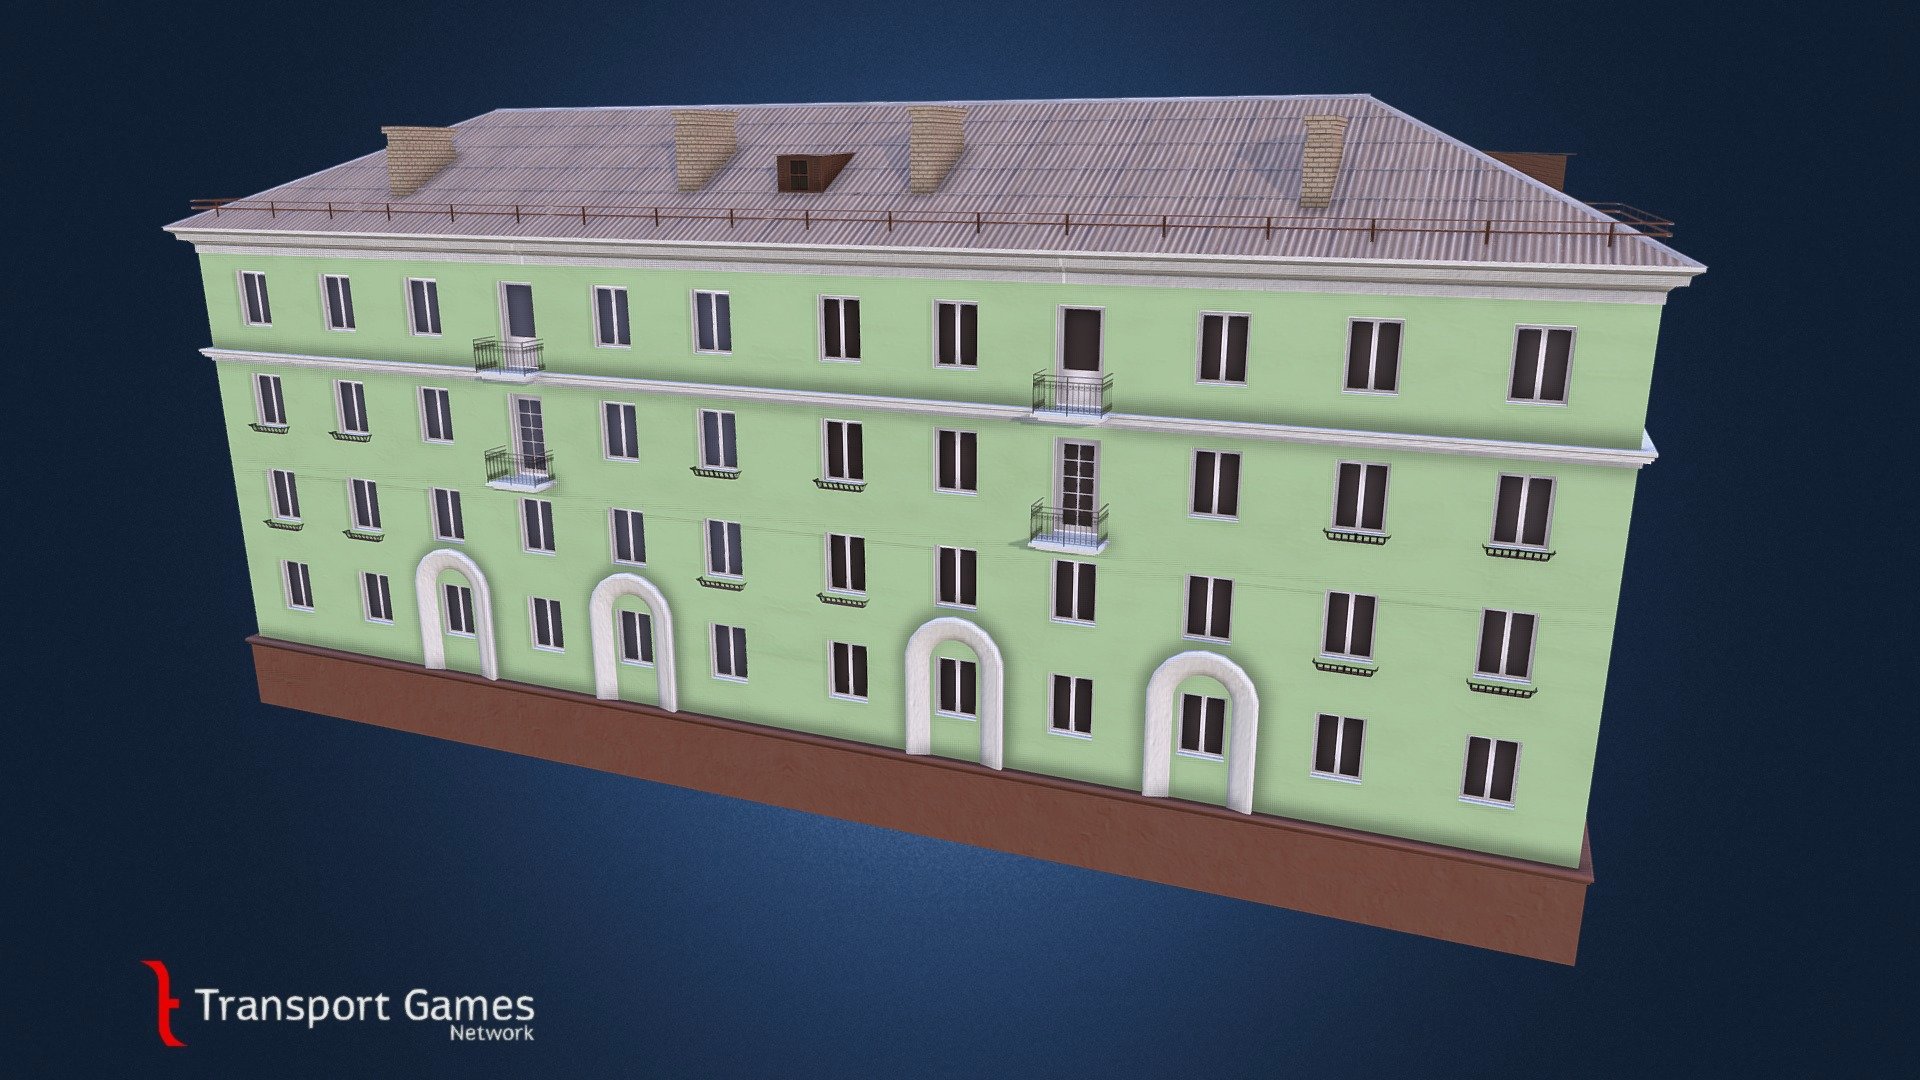 Asset for Citites Skylines.
Series 1-414-1.
Typical soviet house in middle 20th century.
 - Residental House project 1-414-1 - 3D model by targa (@targettius) 3d model